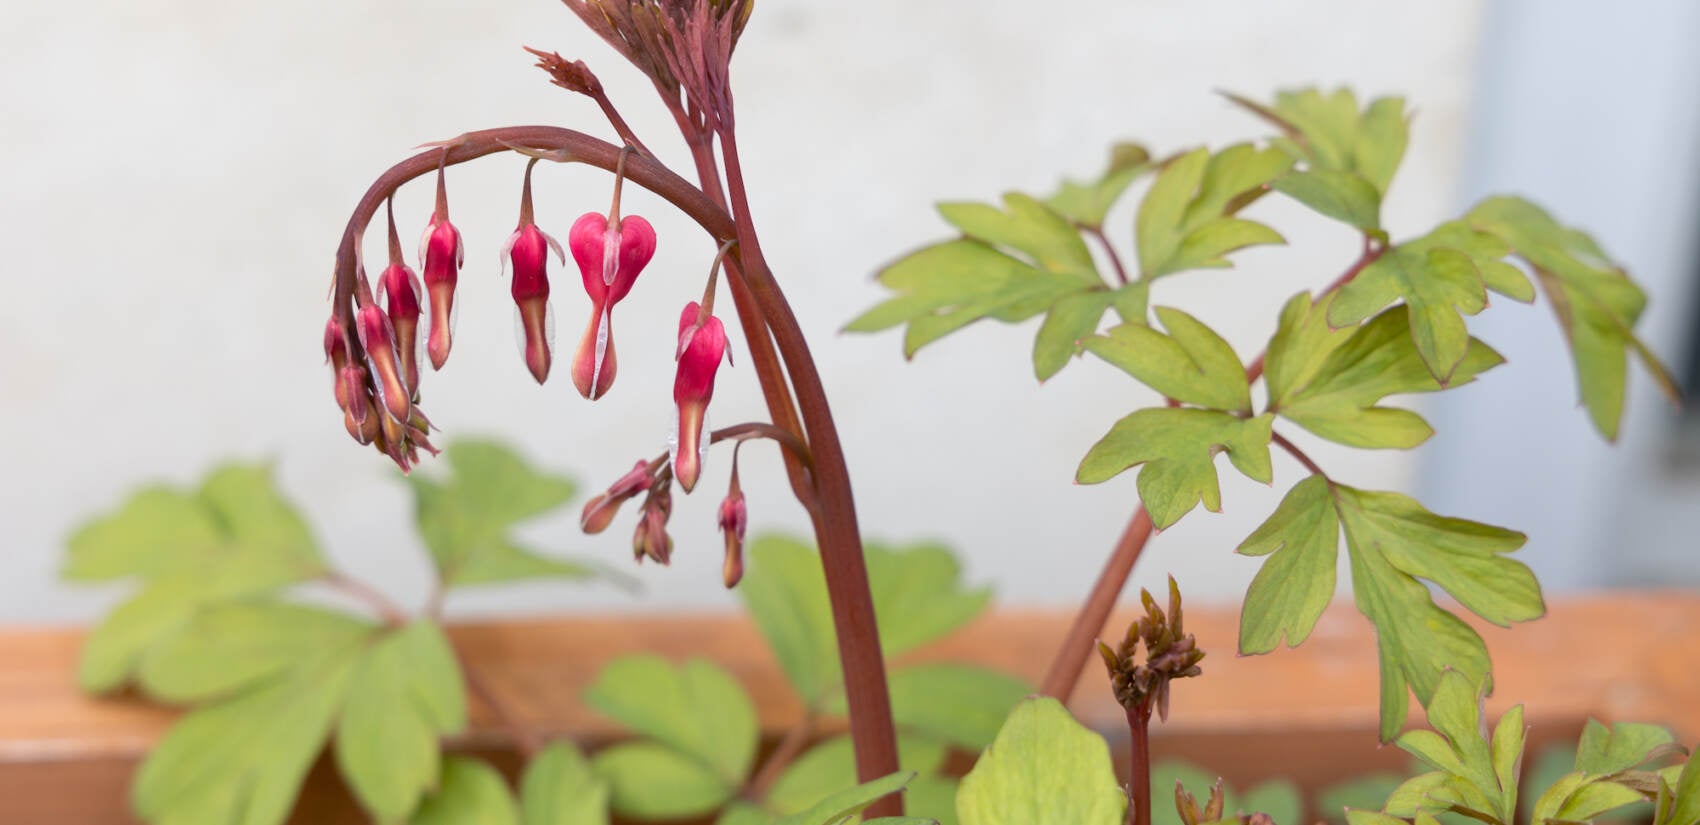 A dicentra plant, commonly known as a bleeding heart, is an early bloomer in Port Richmond. (Kimberly Paynter/WHYY)